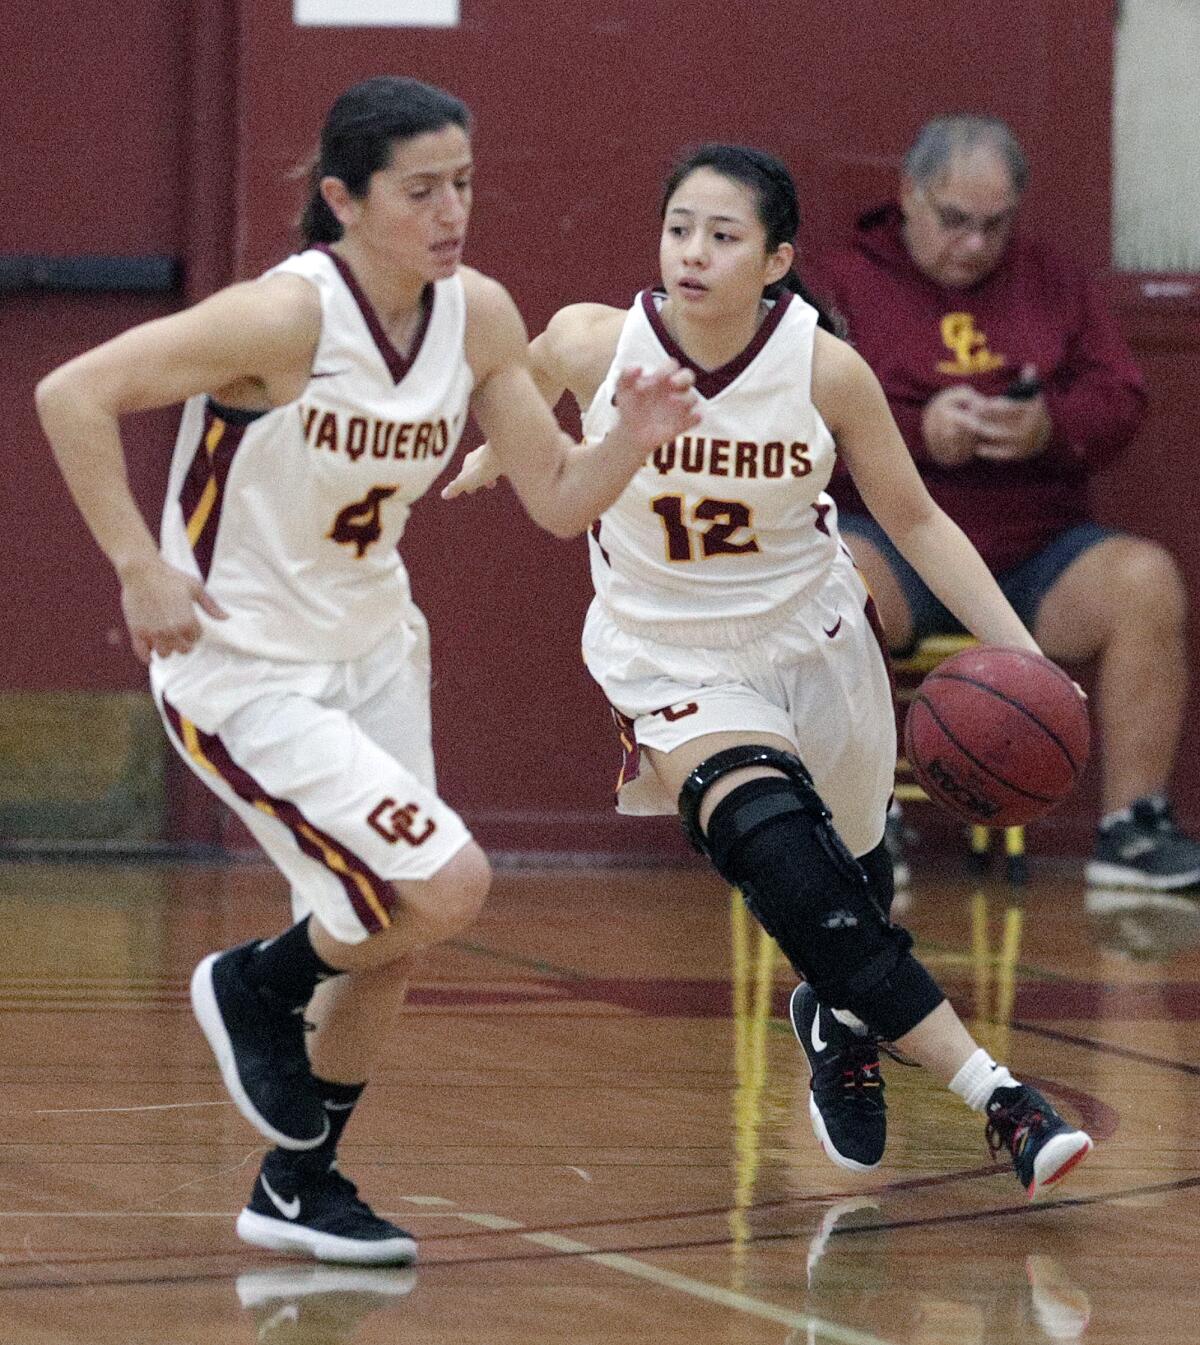 Glendale Community College's Penelopi Trieu brings the ball up court with teammate Vicky Oganyan leading early in the first quarter against Antelope Valley Community College in a Western State Conference women's basketball game at Glendale Community College on Wednesday, January 22, 2020.